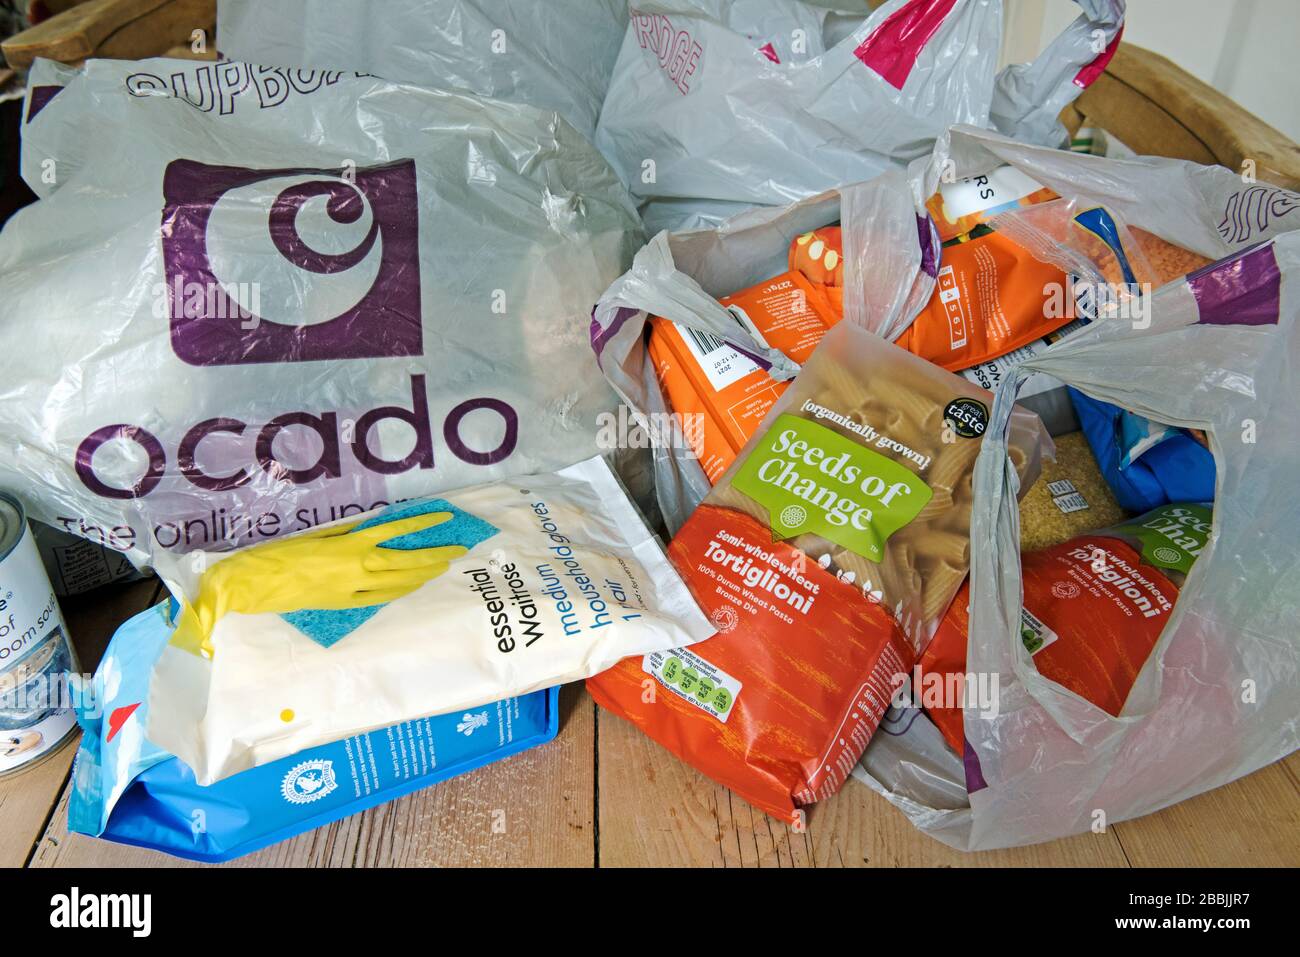 Groceries delivered by Ocado in bags on kitchen table Stock Photo